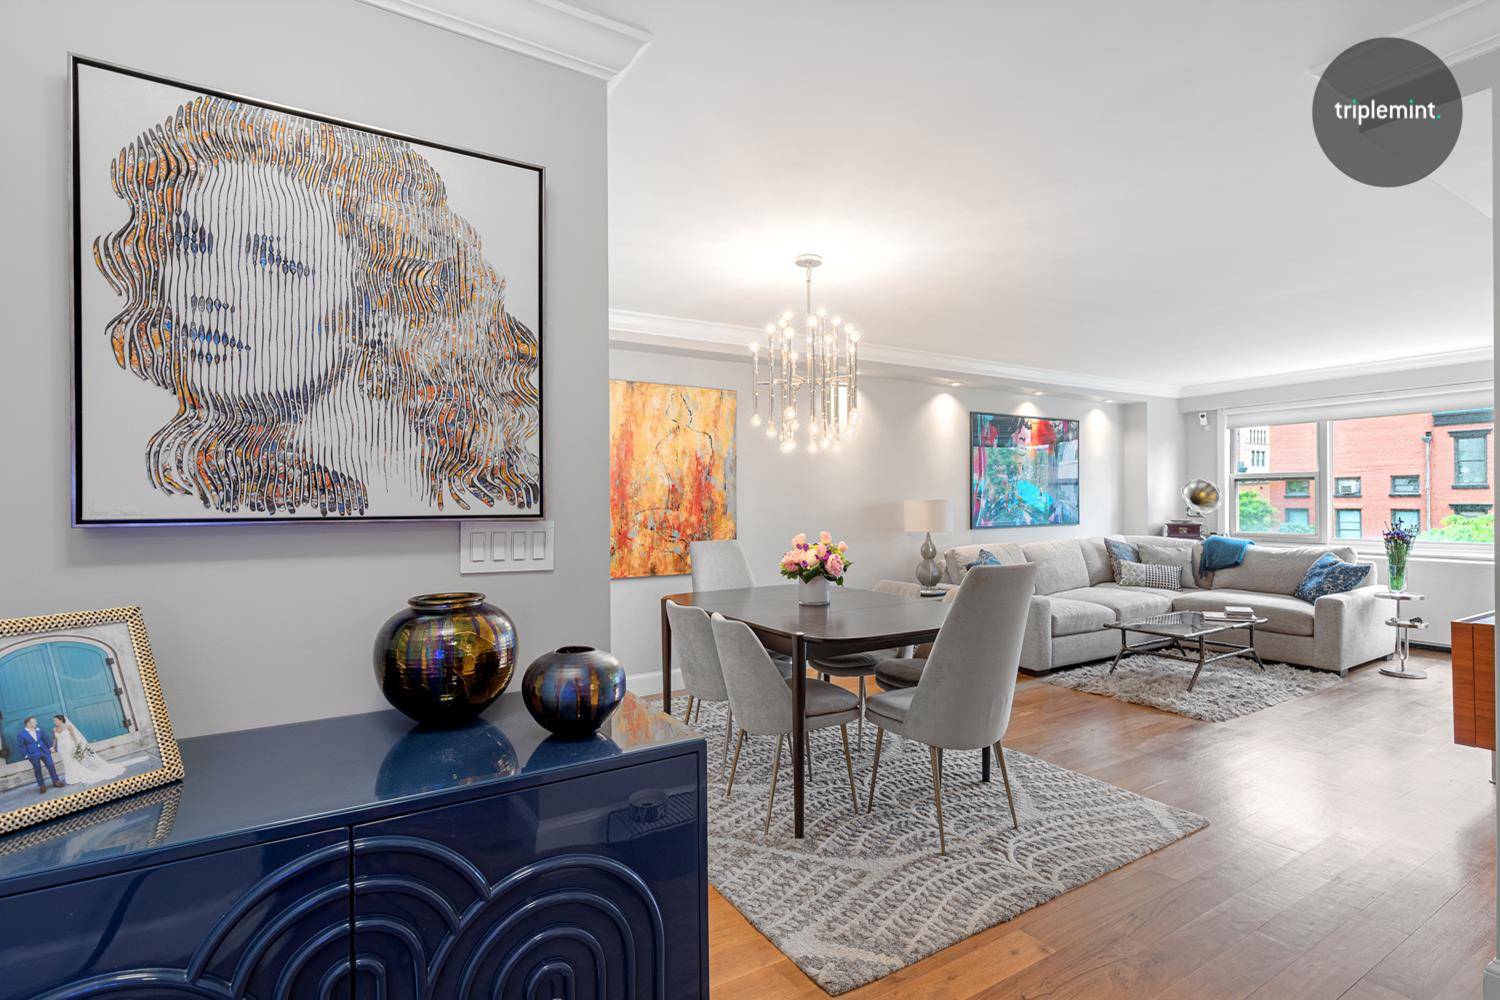 Welcome to 4N at 101 West 12th Street where every aspect of this beautiful two bedroom, two bath Greenwich Village home has been fully renovated with no detail overlooked.